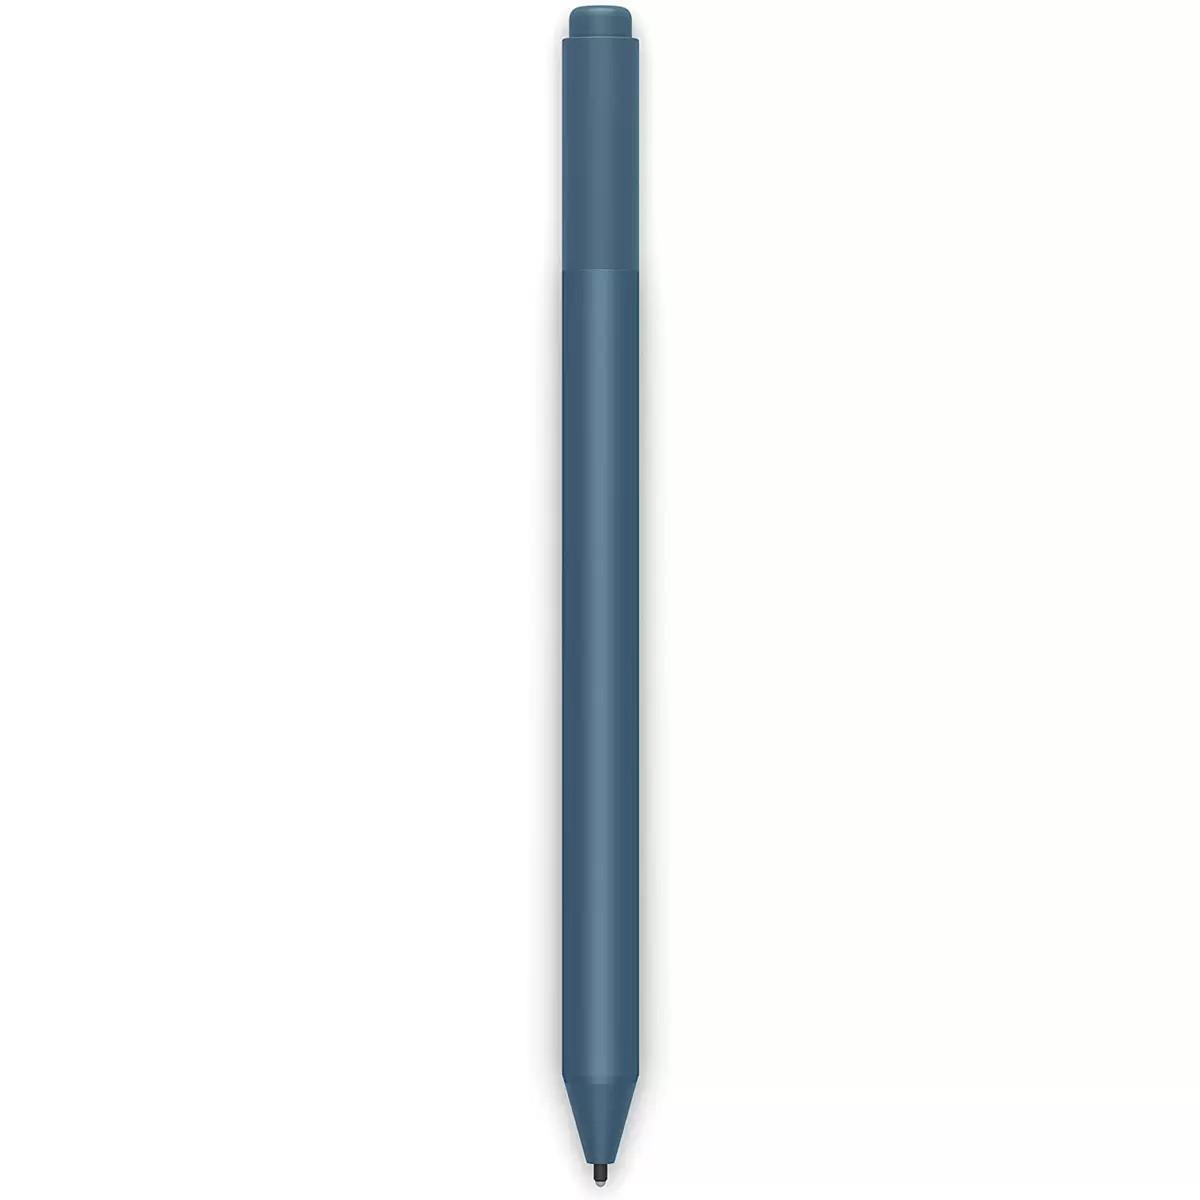 Microsoft Surface Pen for $44.90 Shipped